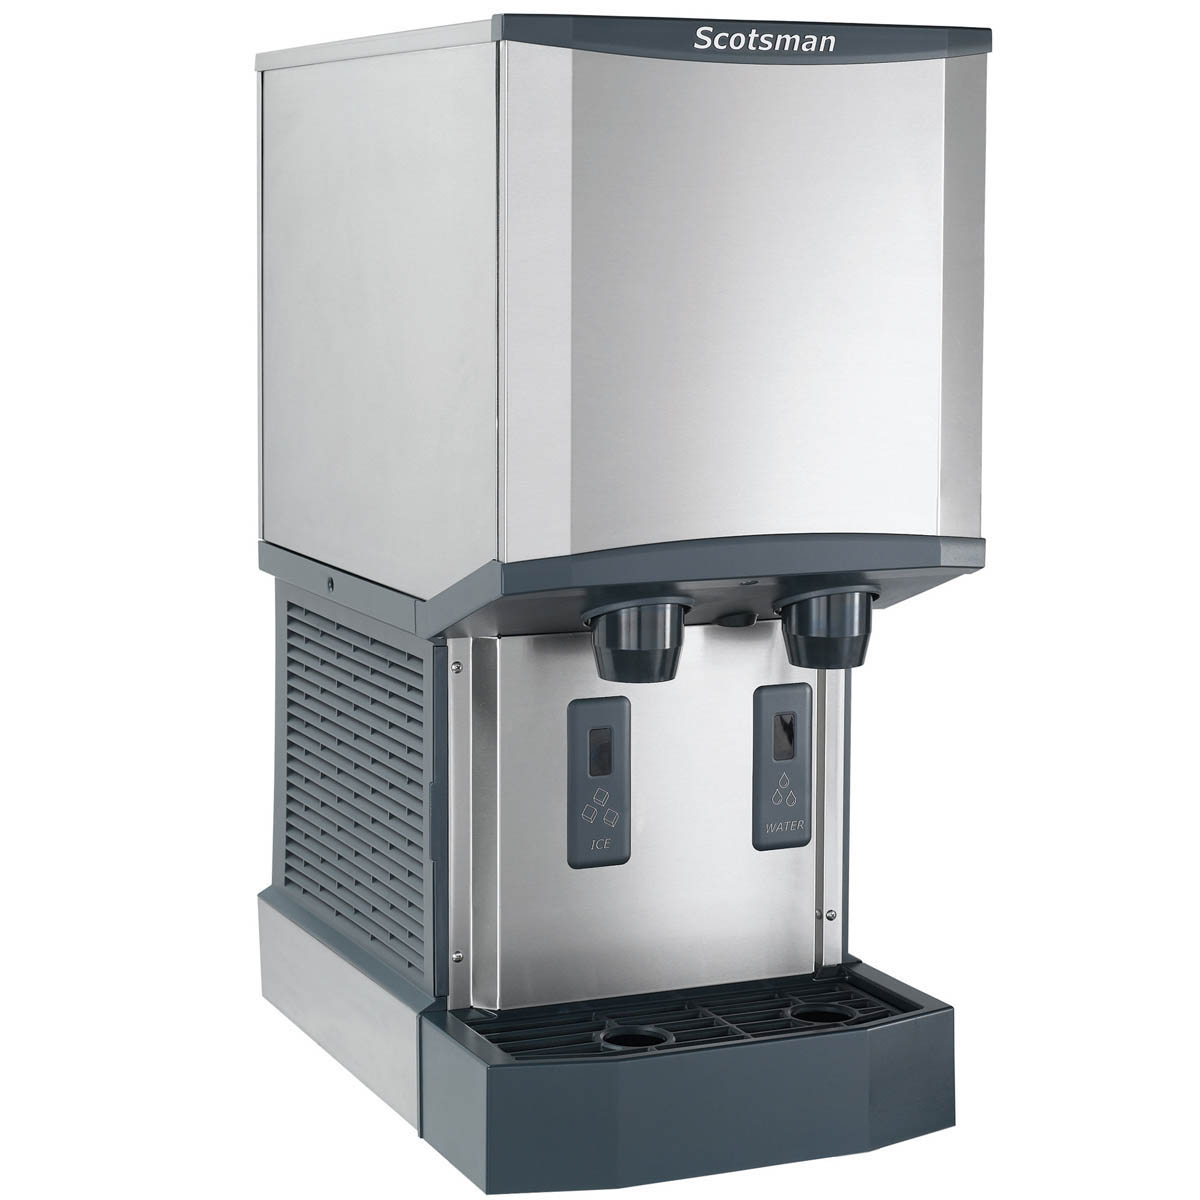 Scotsman HID312A-1 Provides Classic Ice Form, Perfect For Any Beverage, Chef's Deal